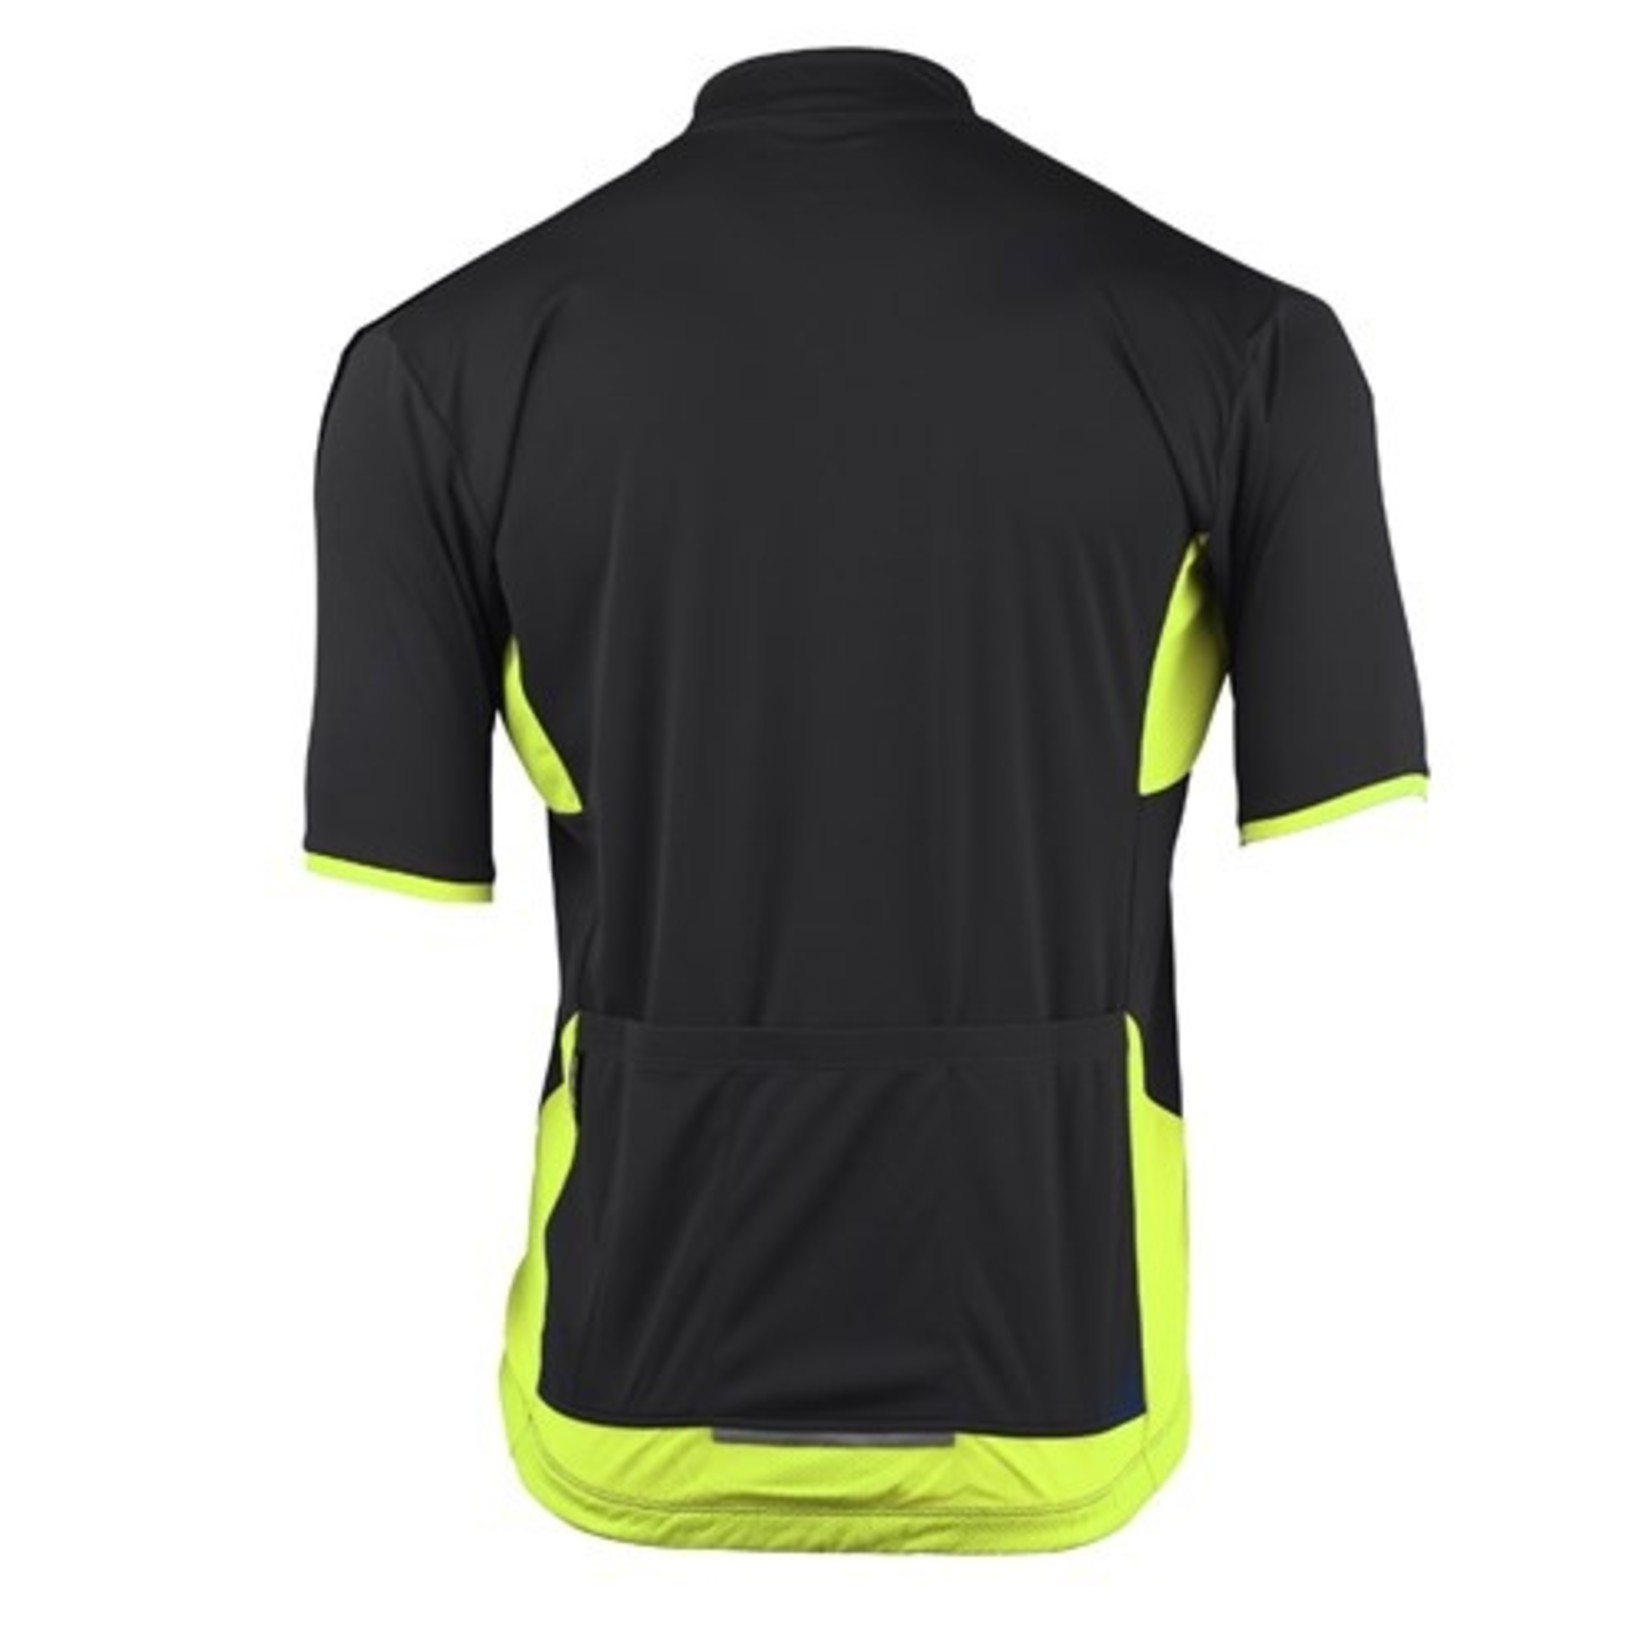 Bellwether Bellwether Distance - Cadence - Semi-Fitted - Dream - Mens Jersey - Black-Citrus